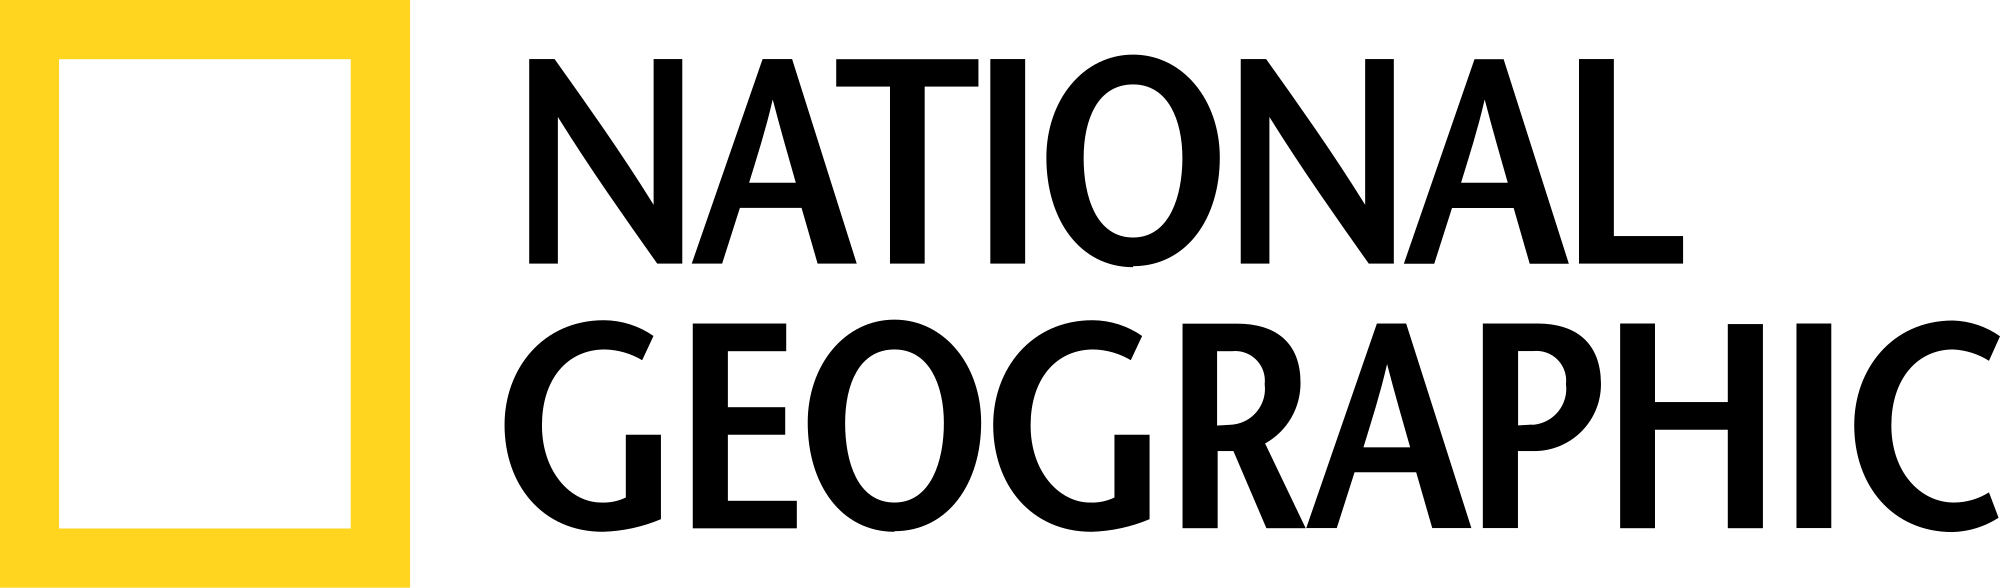 National Geographic Society Channel Logo - File:Natgeologo.svg - Wikimedia Commons